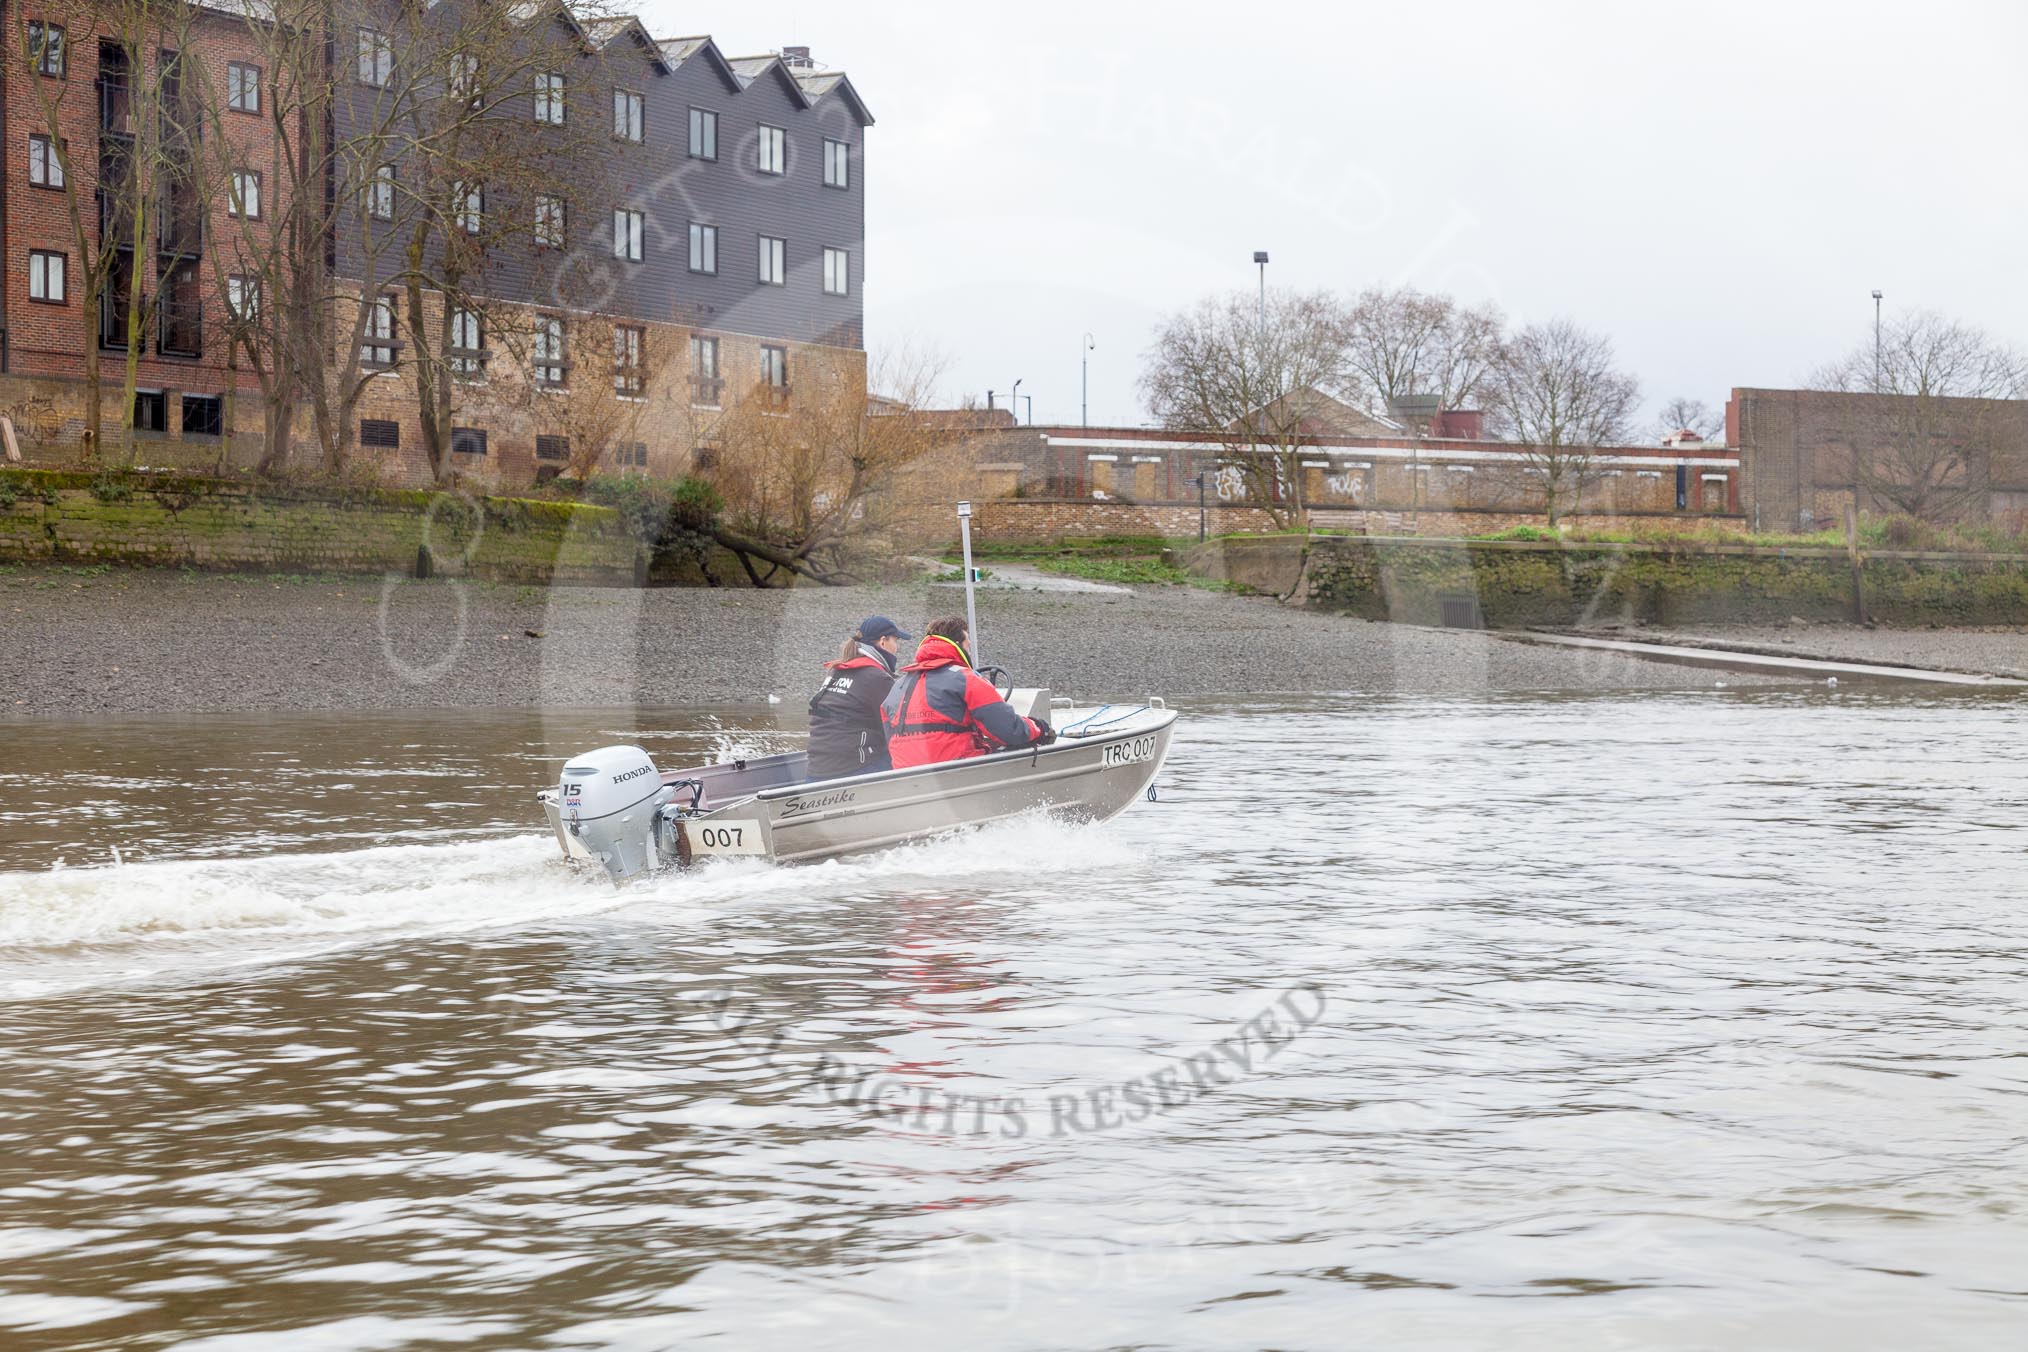 The Boat Race season 2016 - Women's Boat Race Trial Eights (CUWBC, Cambridge): CUWBC head coch Rob Barker in the tin boat folowing the race.
River Thames between Putney Bridge and Mortlake,
London SW15,

United Kingdom,
on 10 December 2015 at 11:22, image #117